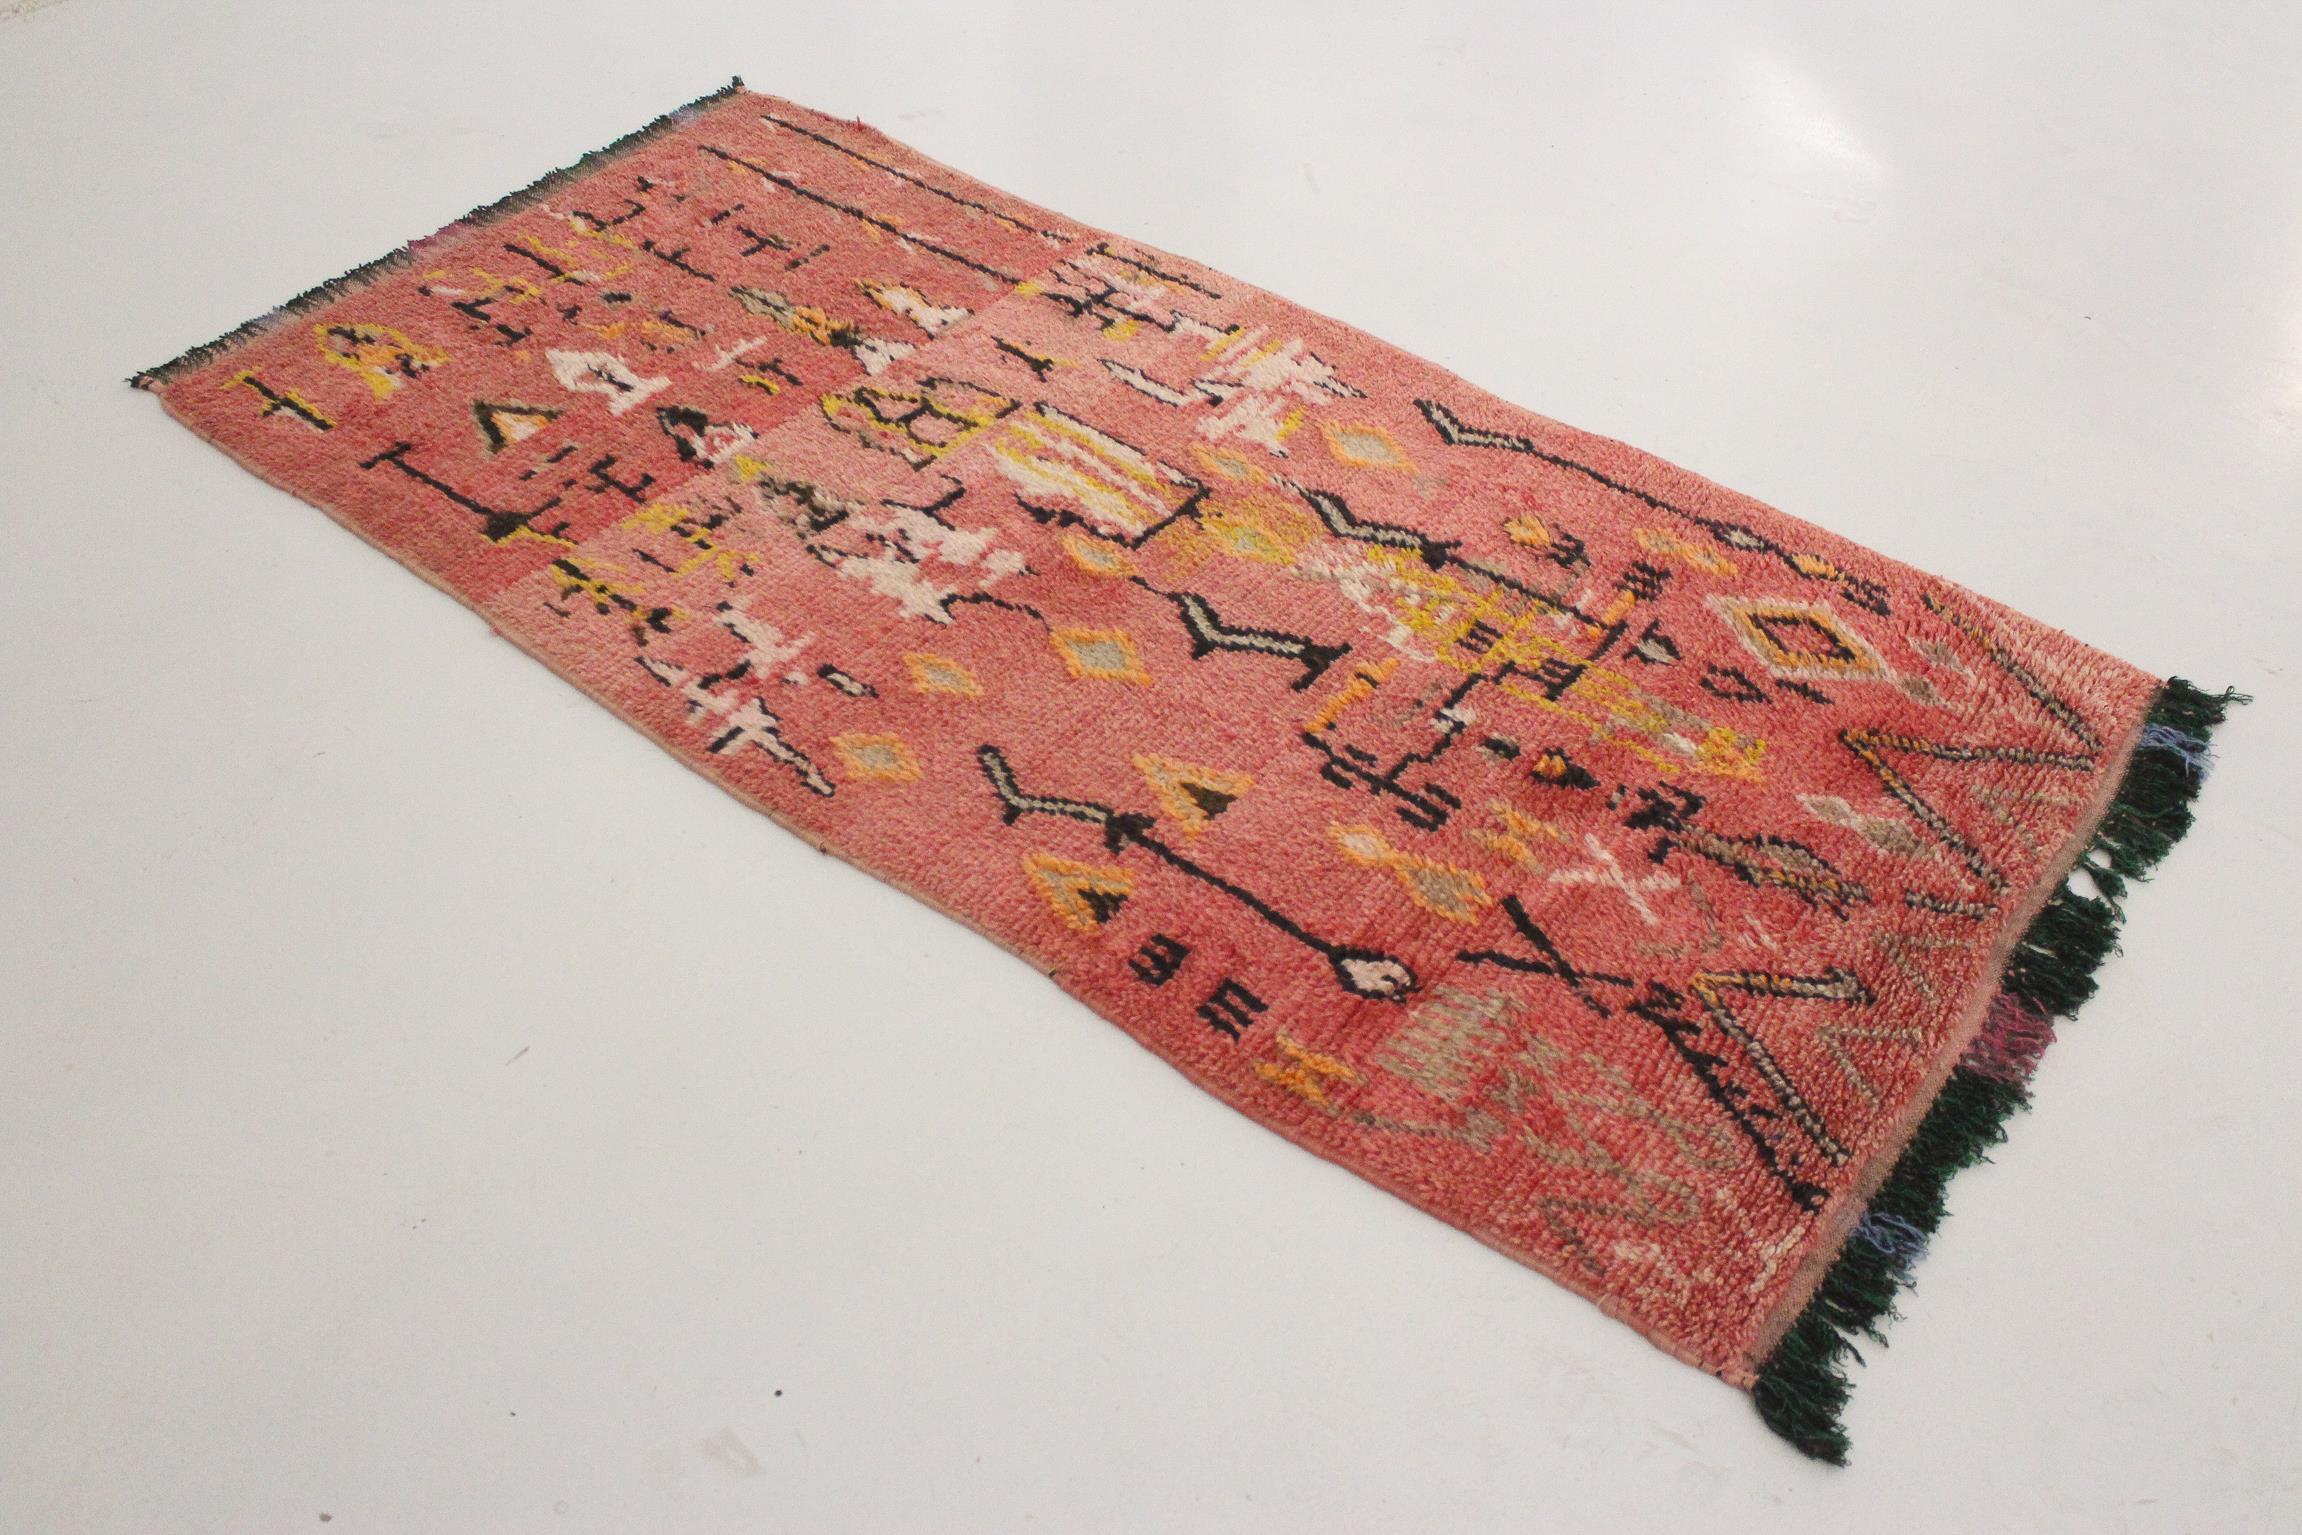 Tribal Vintage Moroccan Azilal rug - Pink and yellow - 3.7x7.7feet / 114x236cm For Sale